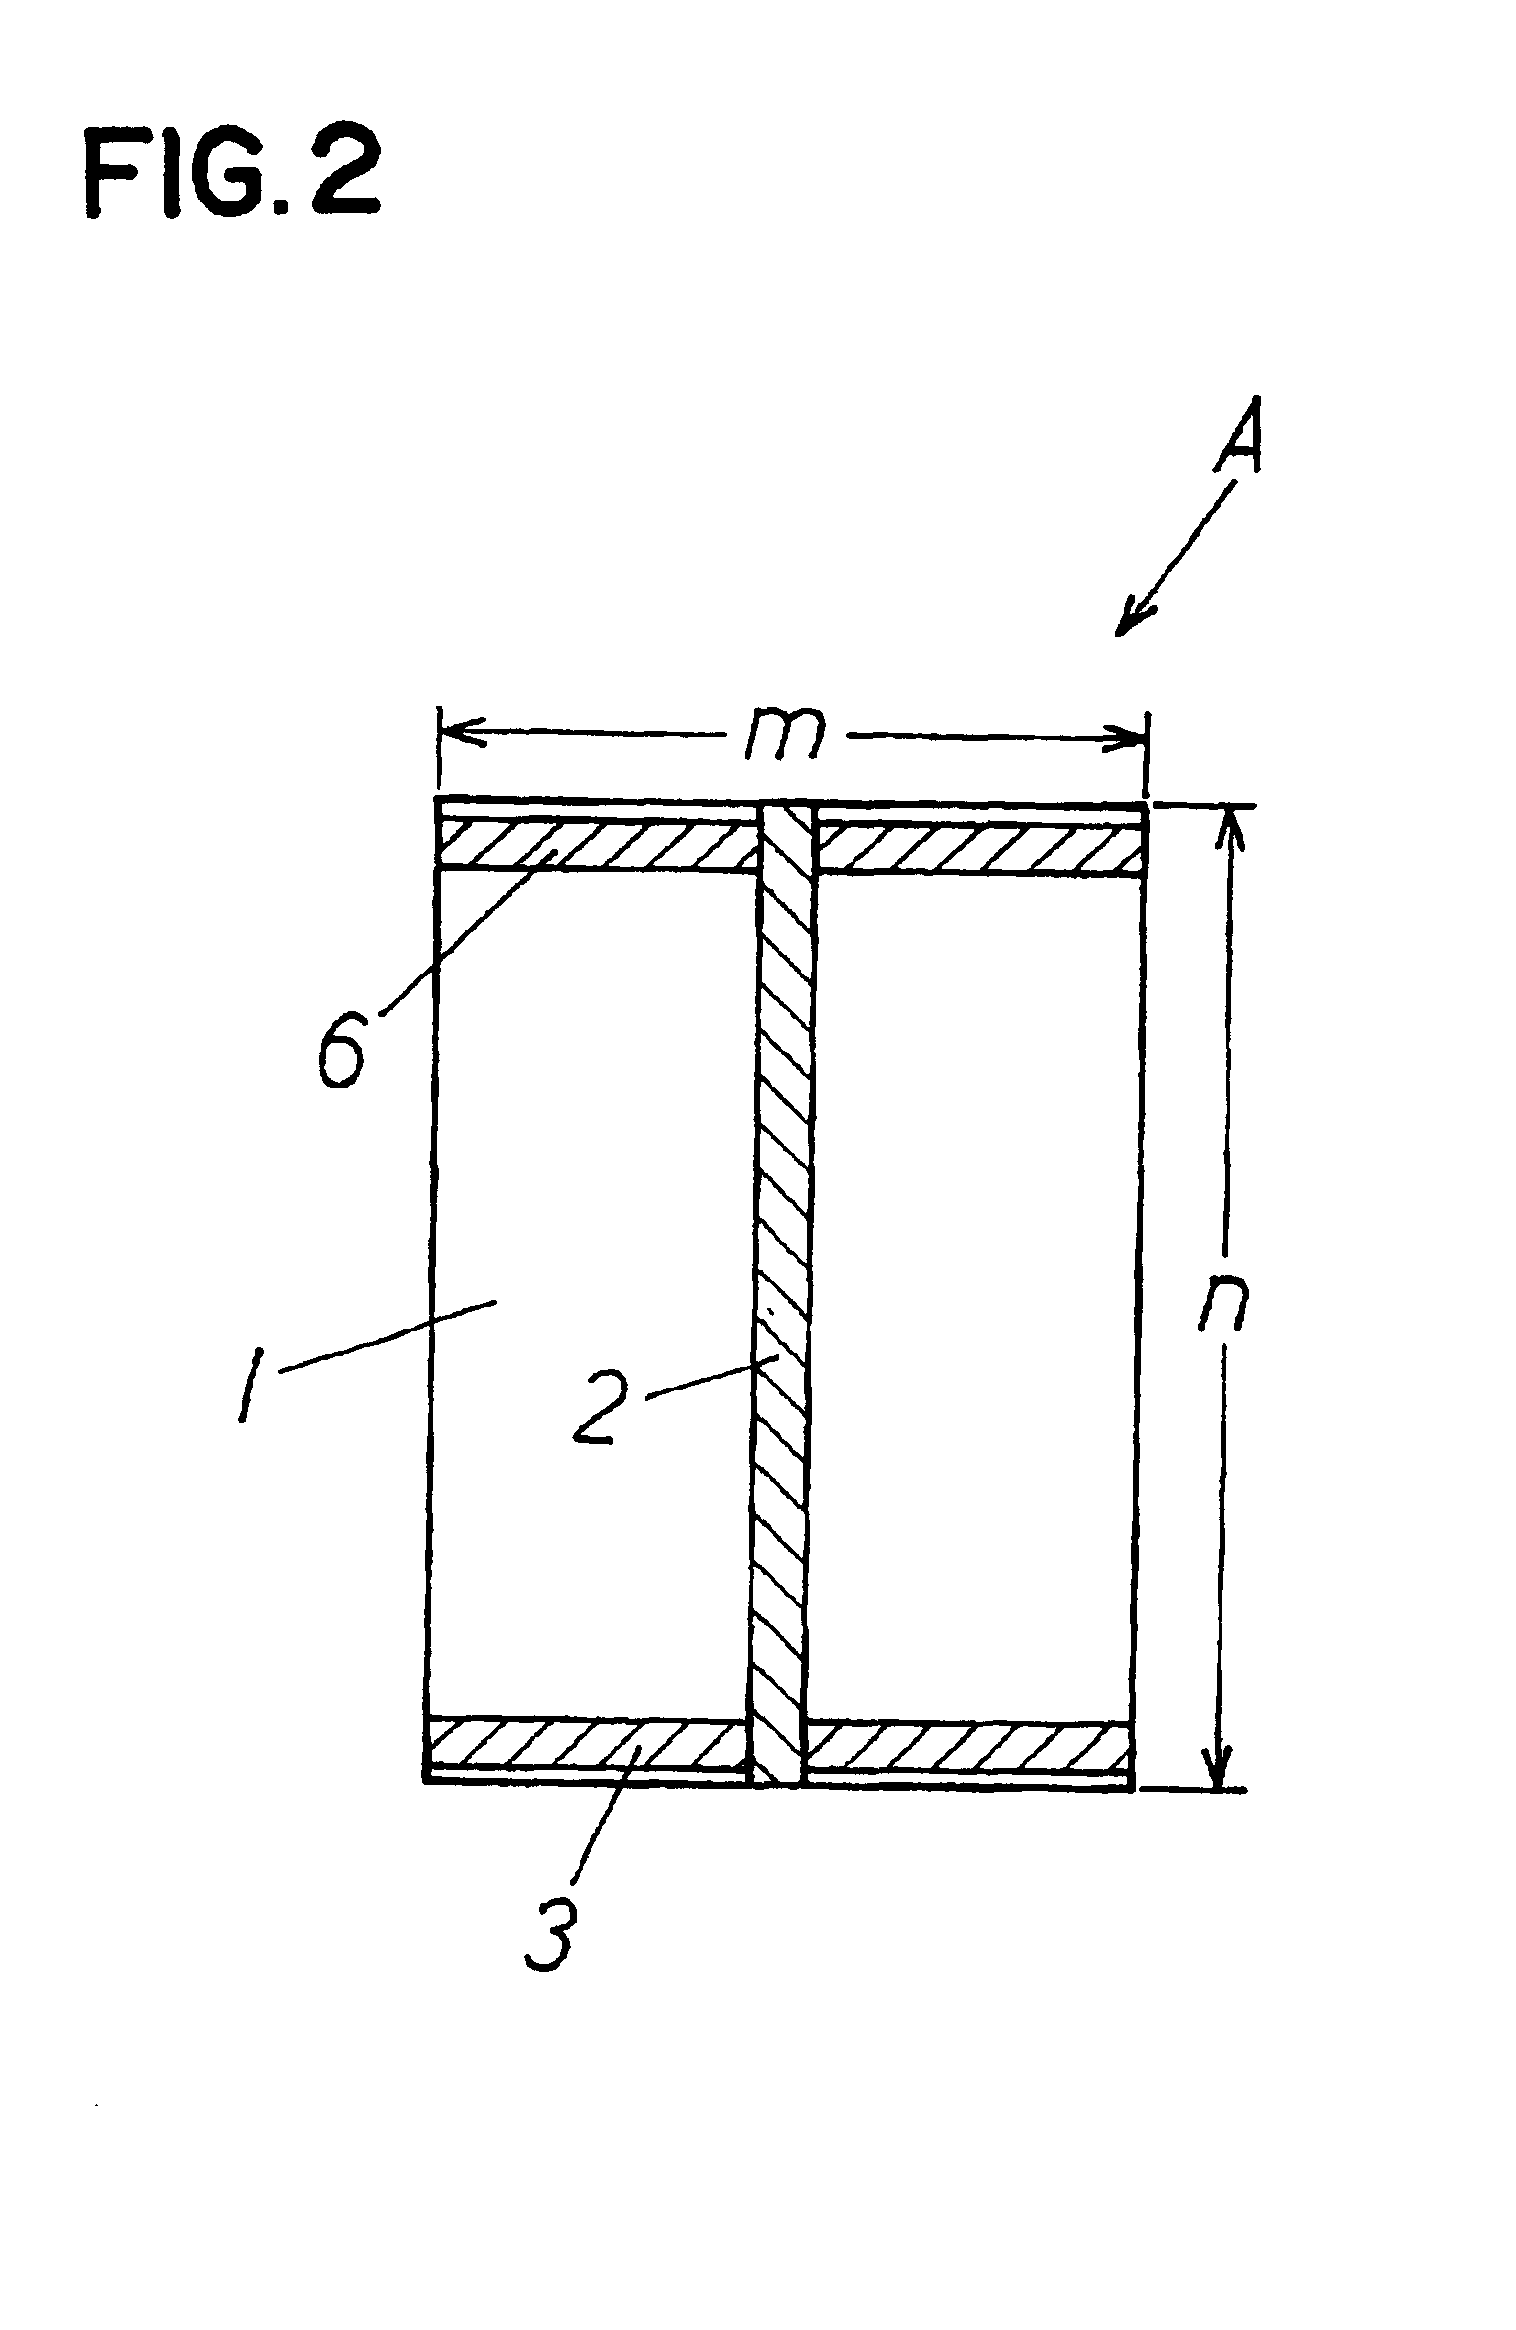 Packaging body for heating processing